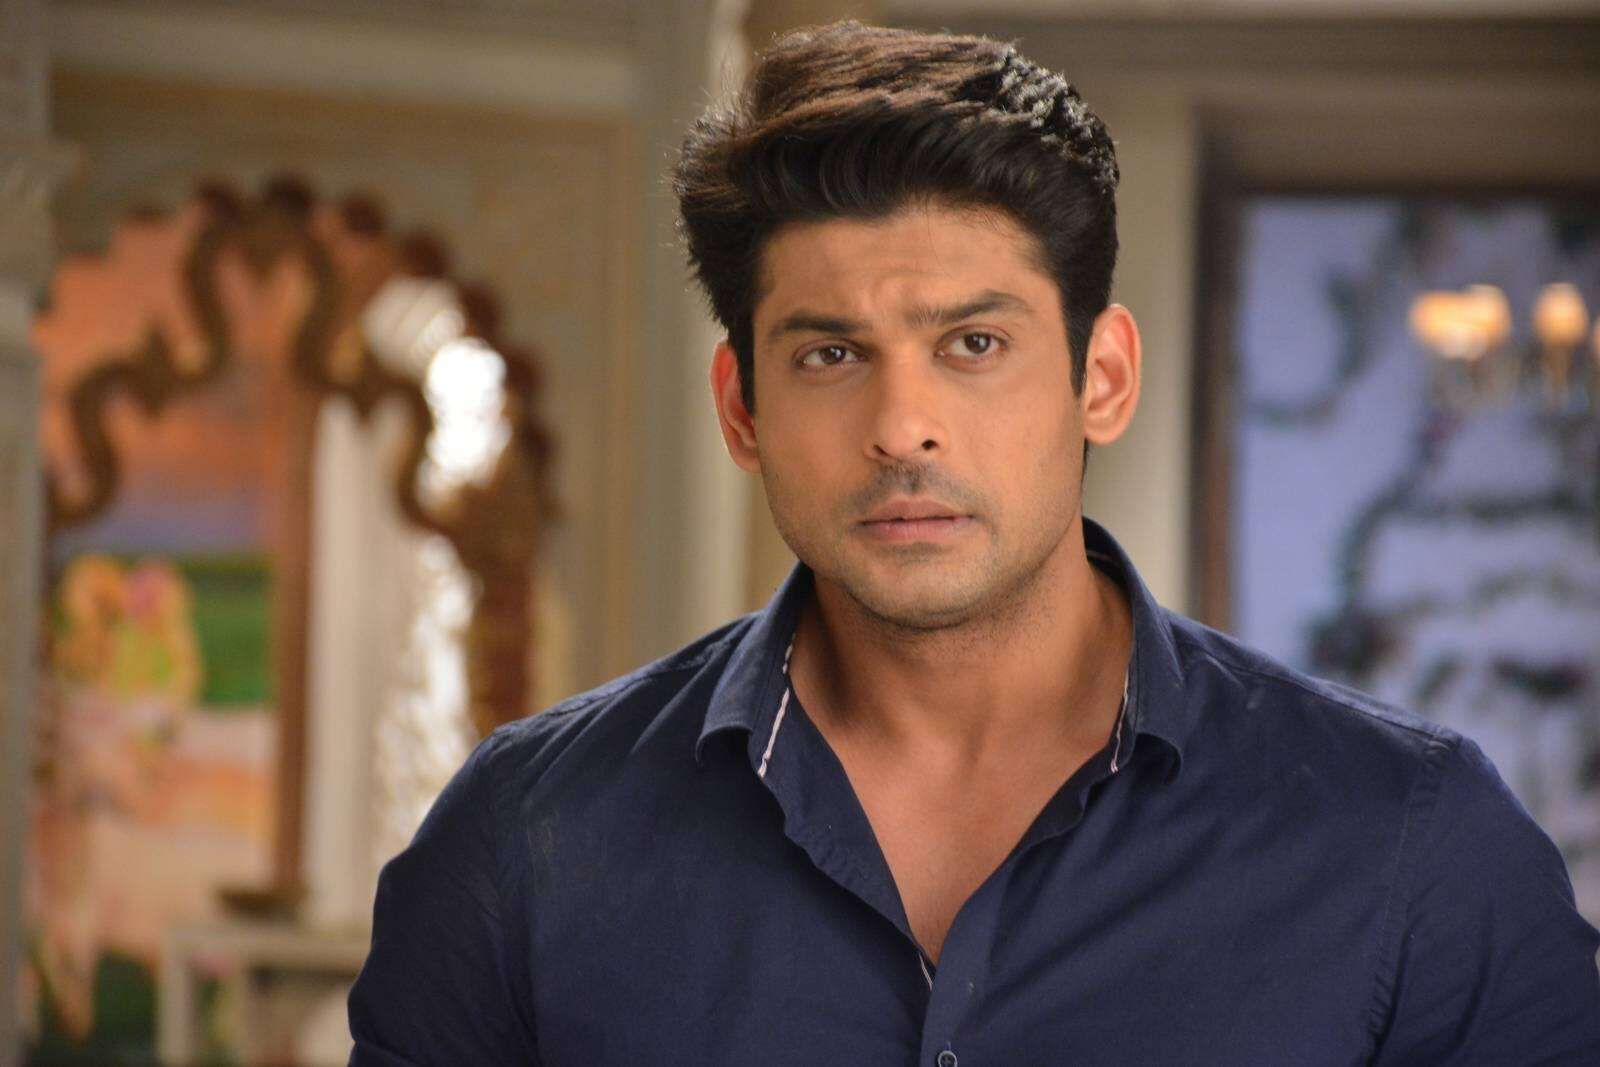 Sidharth Shukla passes away at 40 after suffering from a heart attack